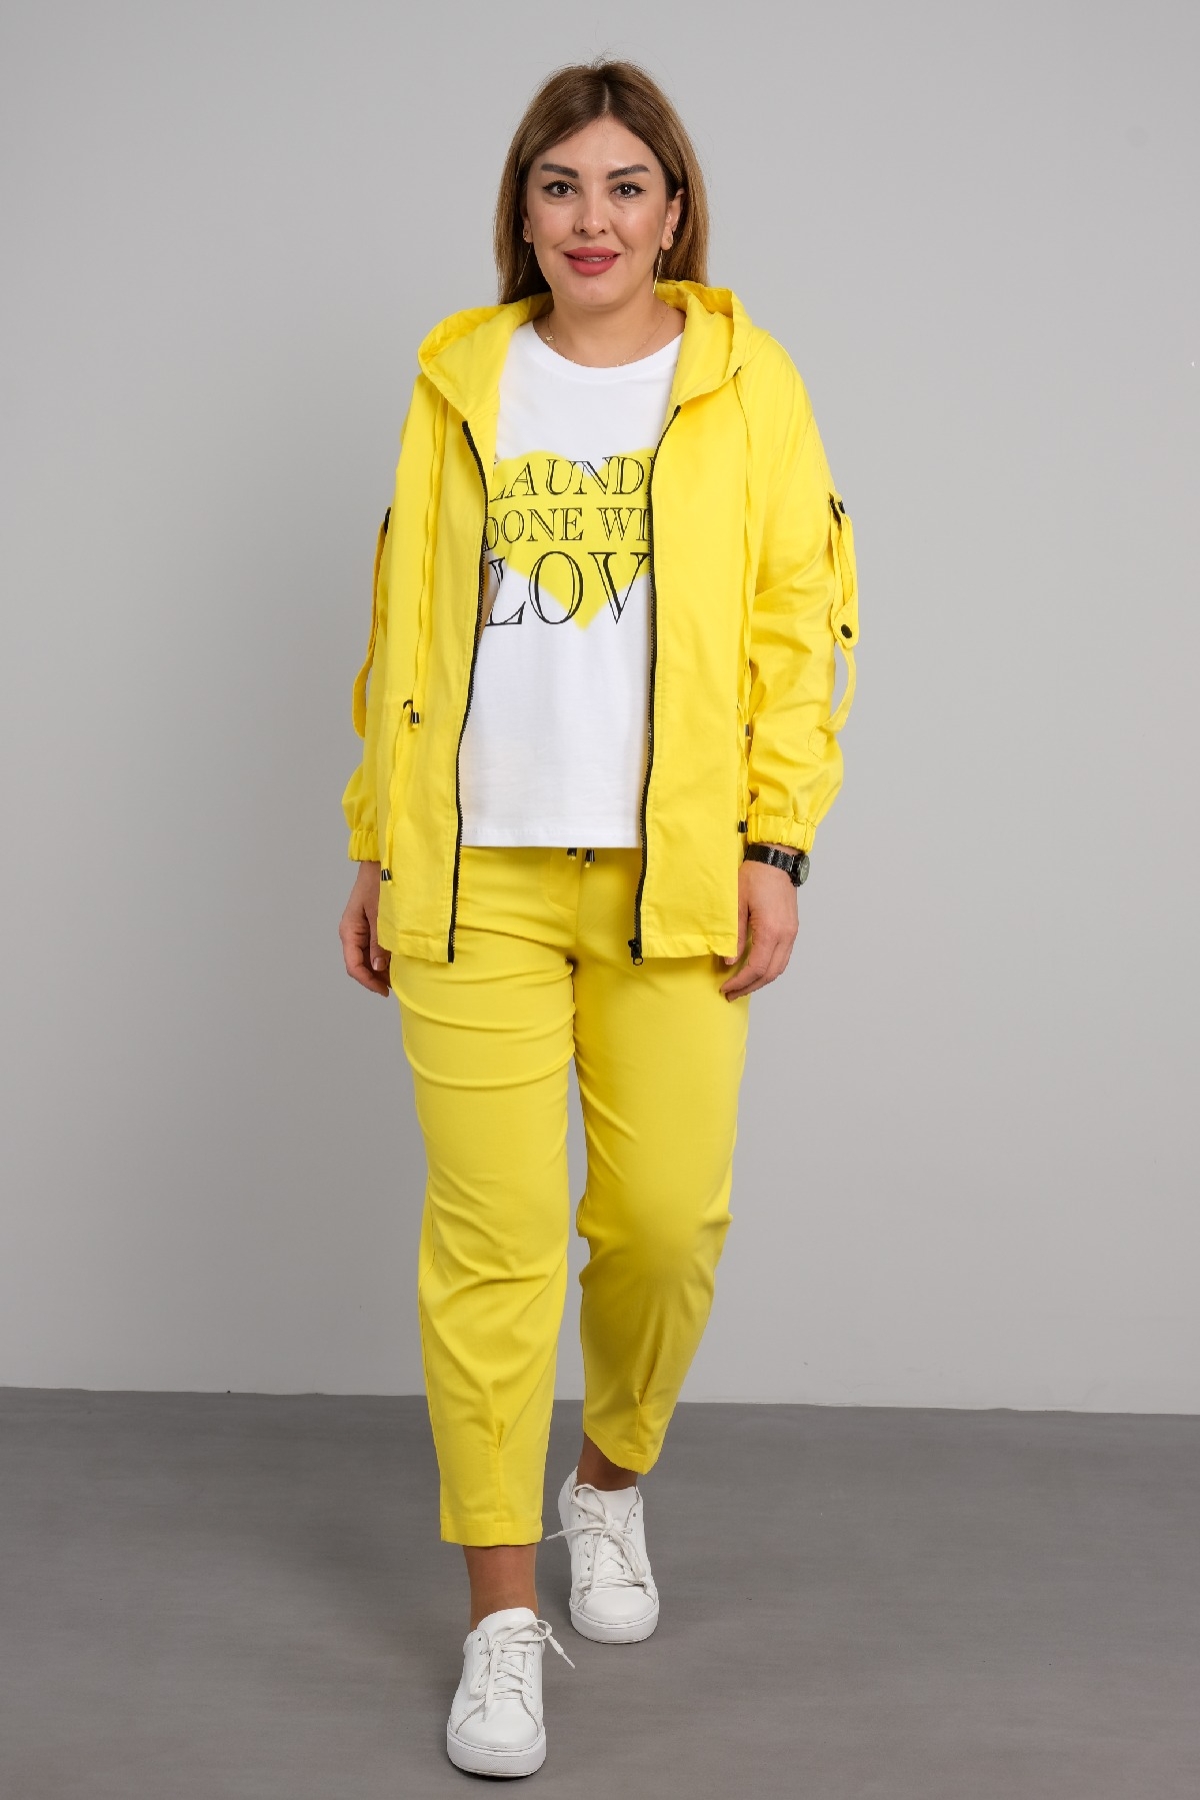 Women's 3 Piece Suits-Yellow